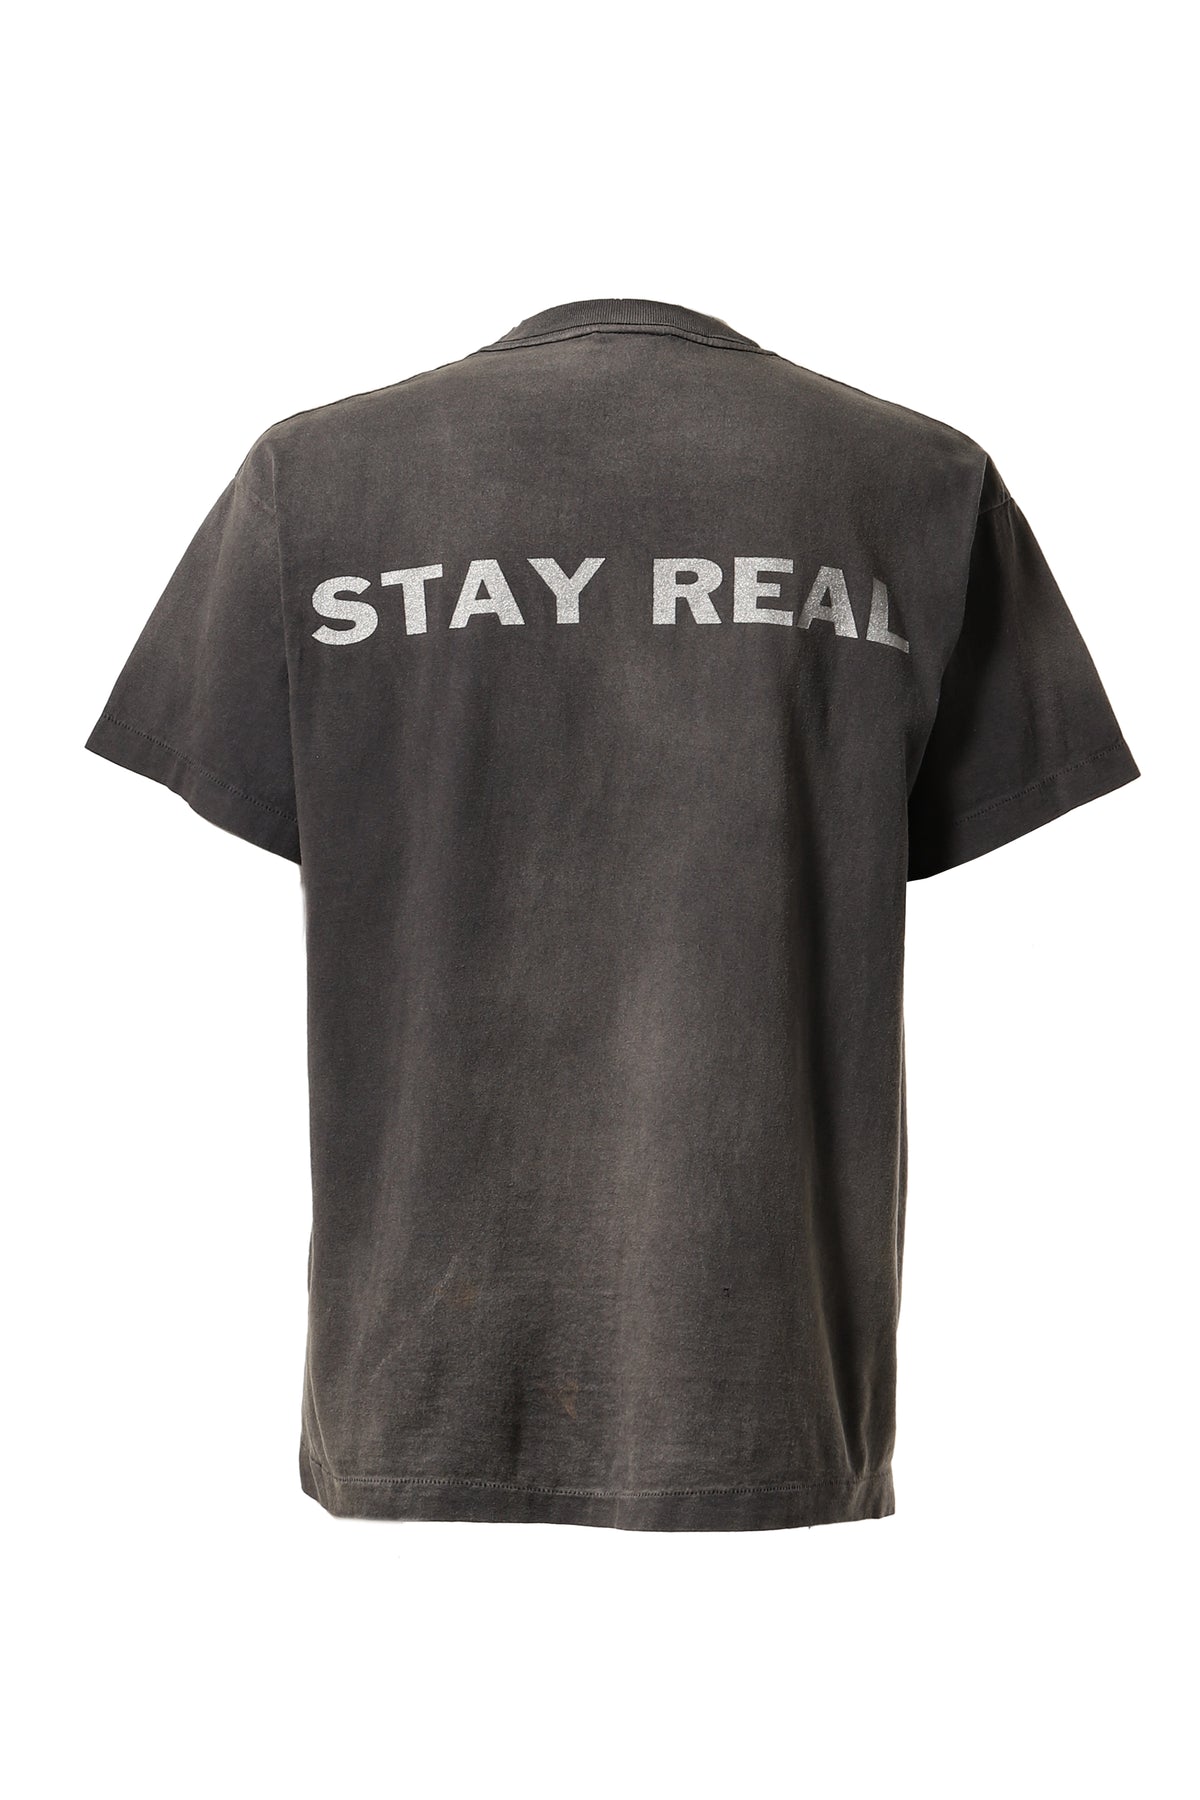 PTP_SS TEE/STAY REAL / BLK